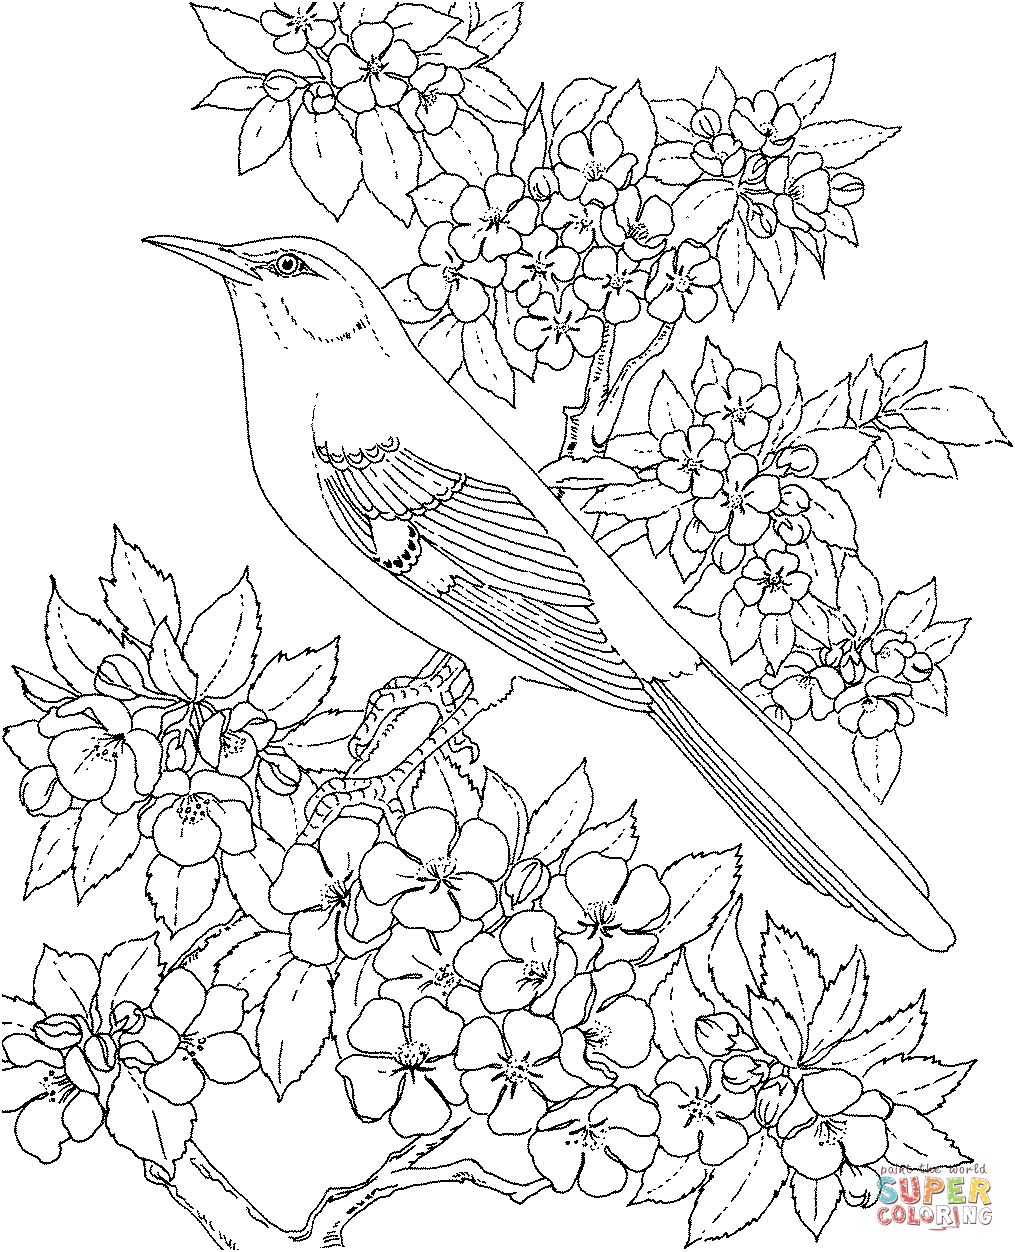 Arkansas Mockingbird and Apple Blossom coloring page | Free ...